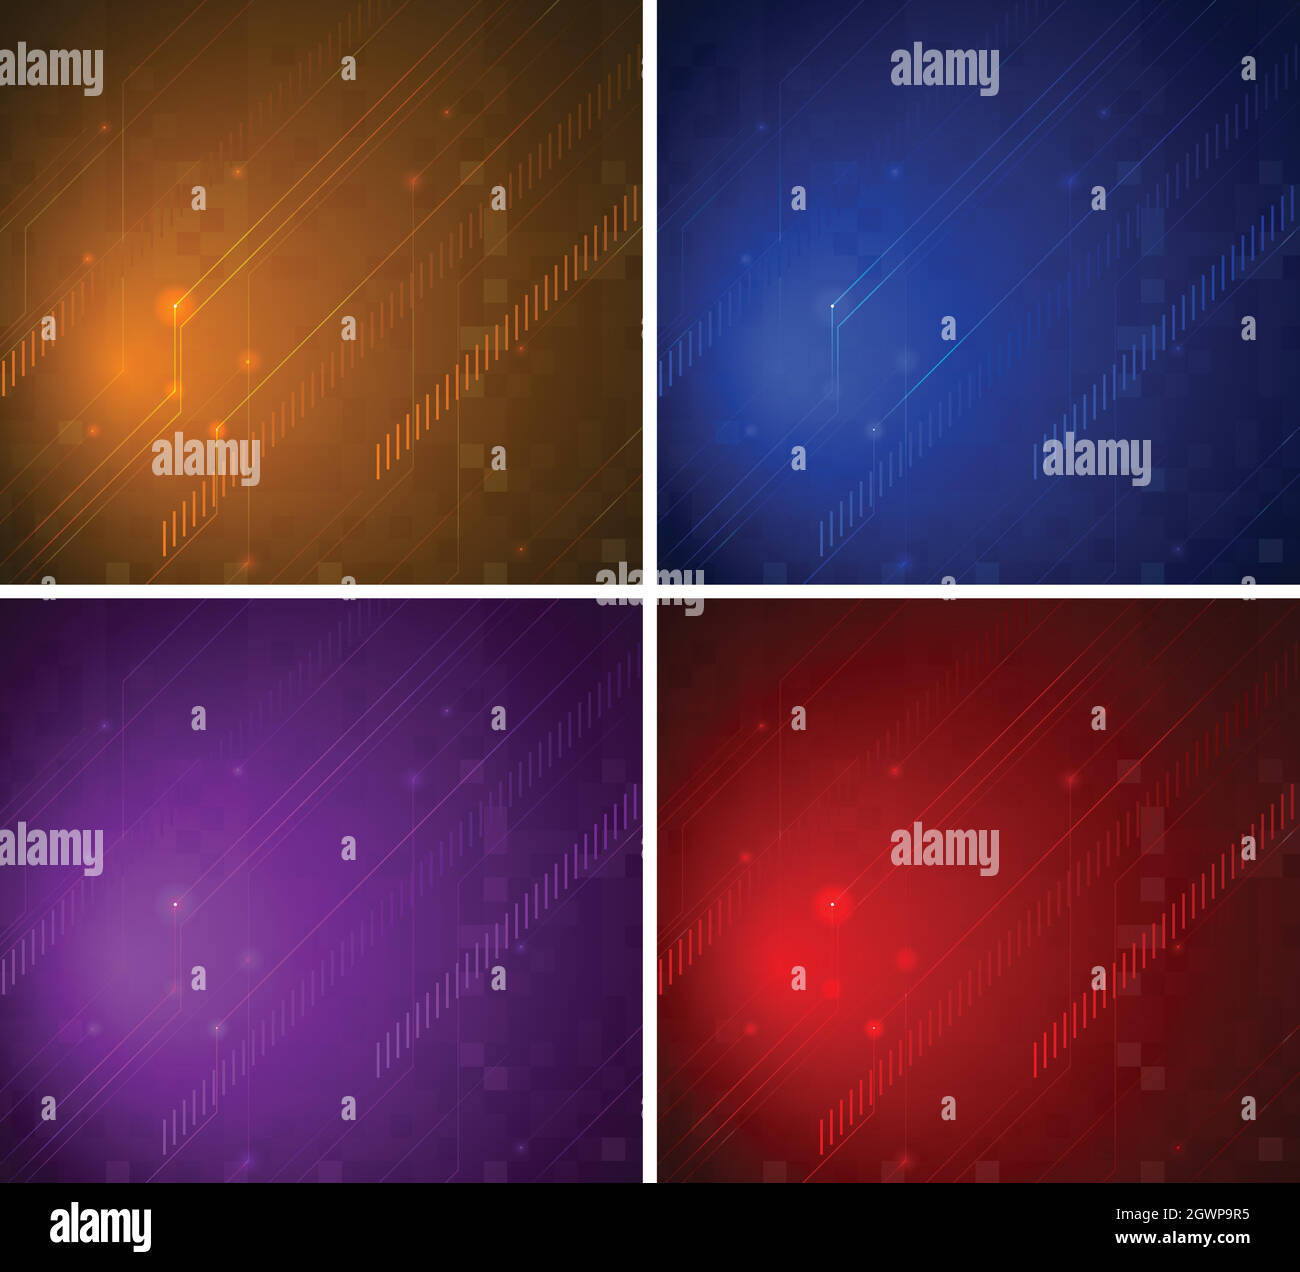 Colourful patterns Stock Vector Images - Alamy